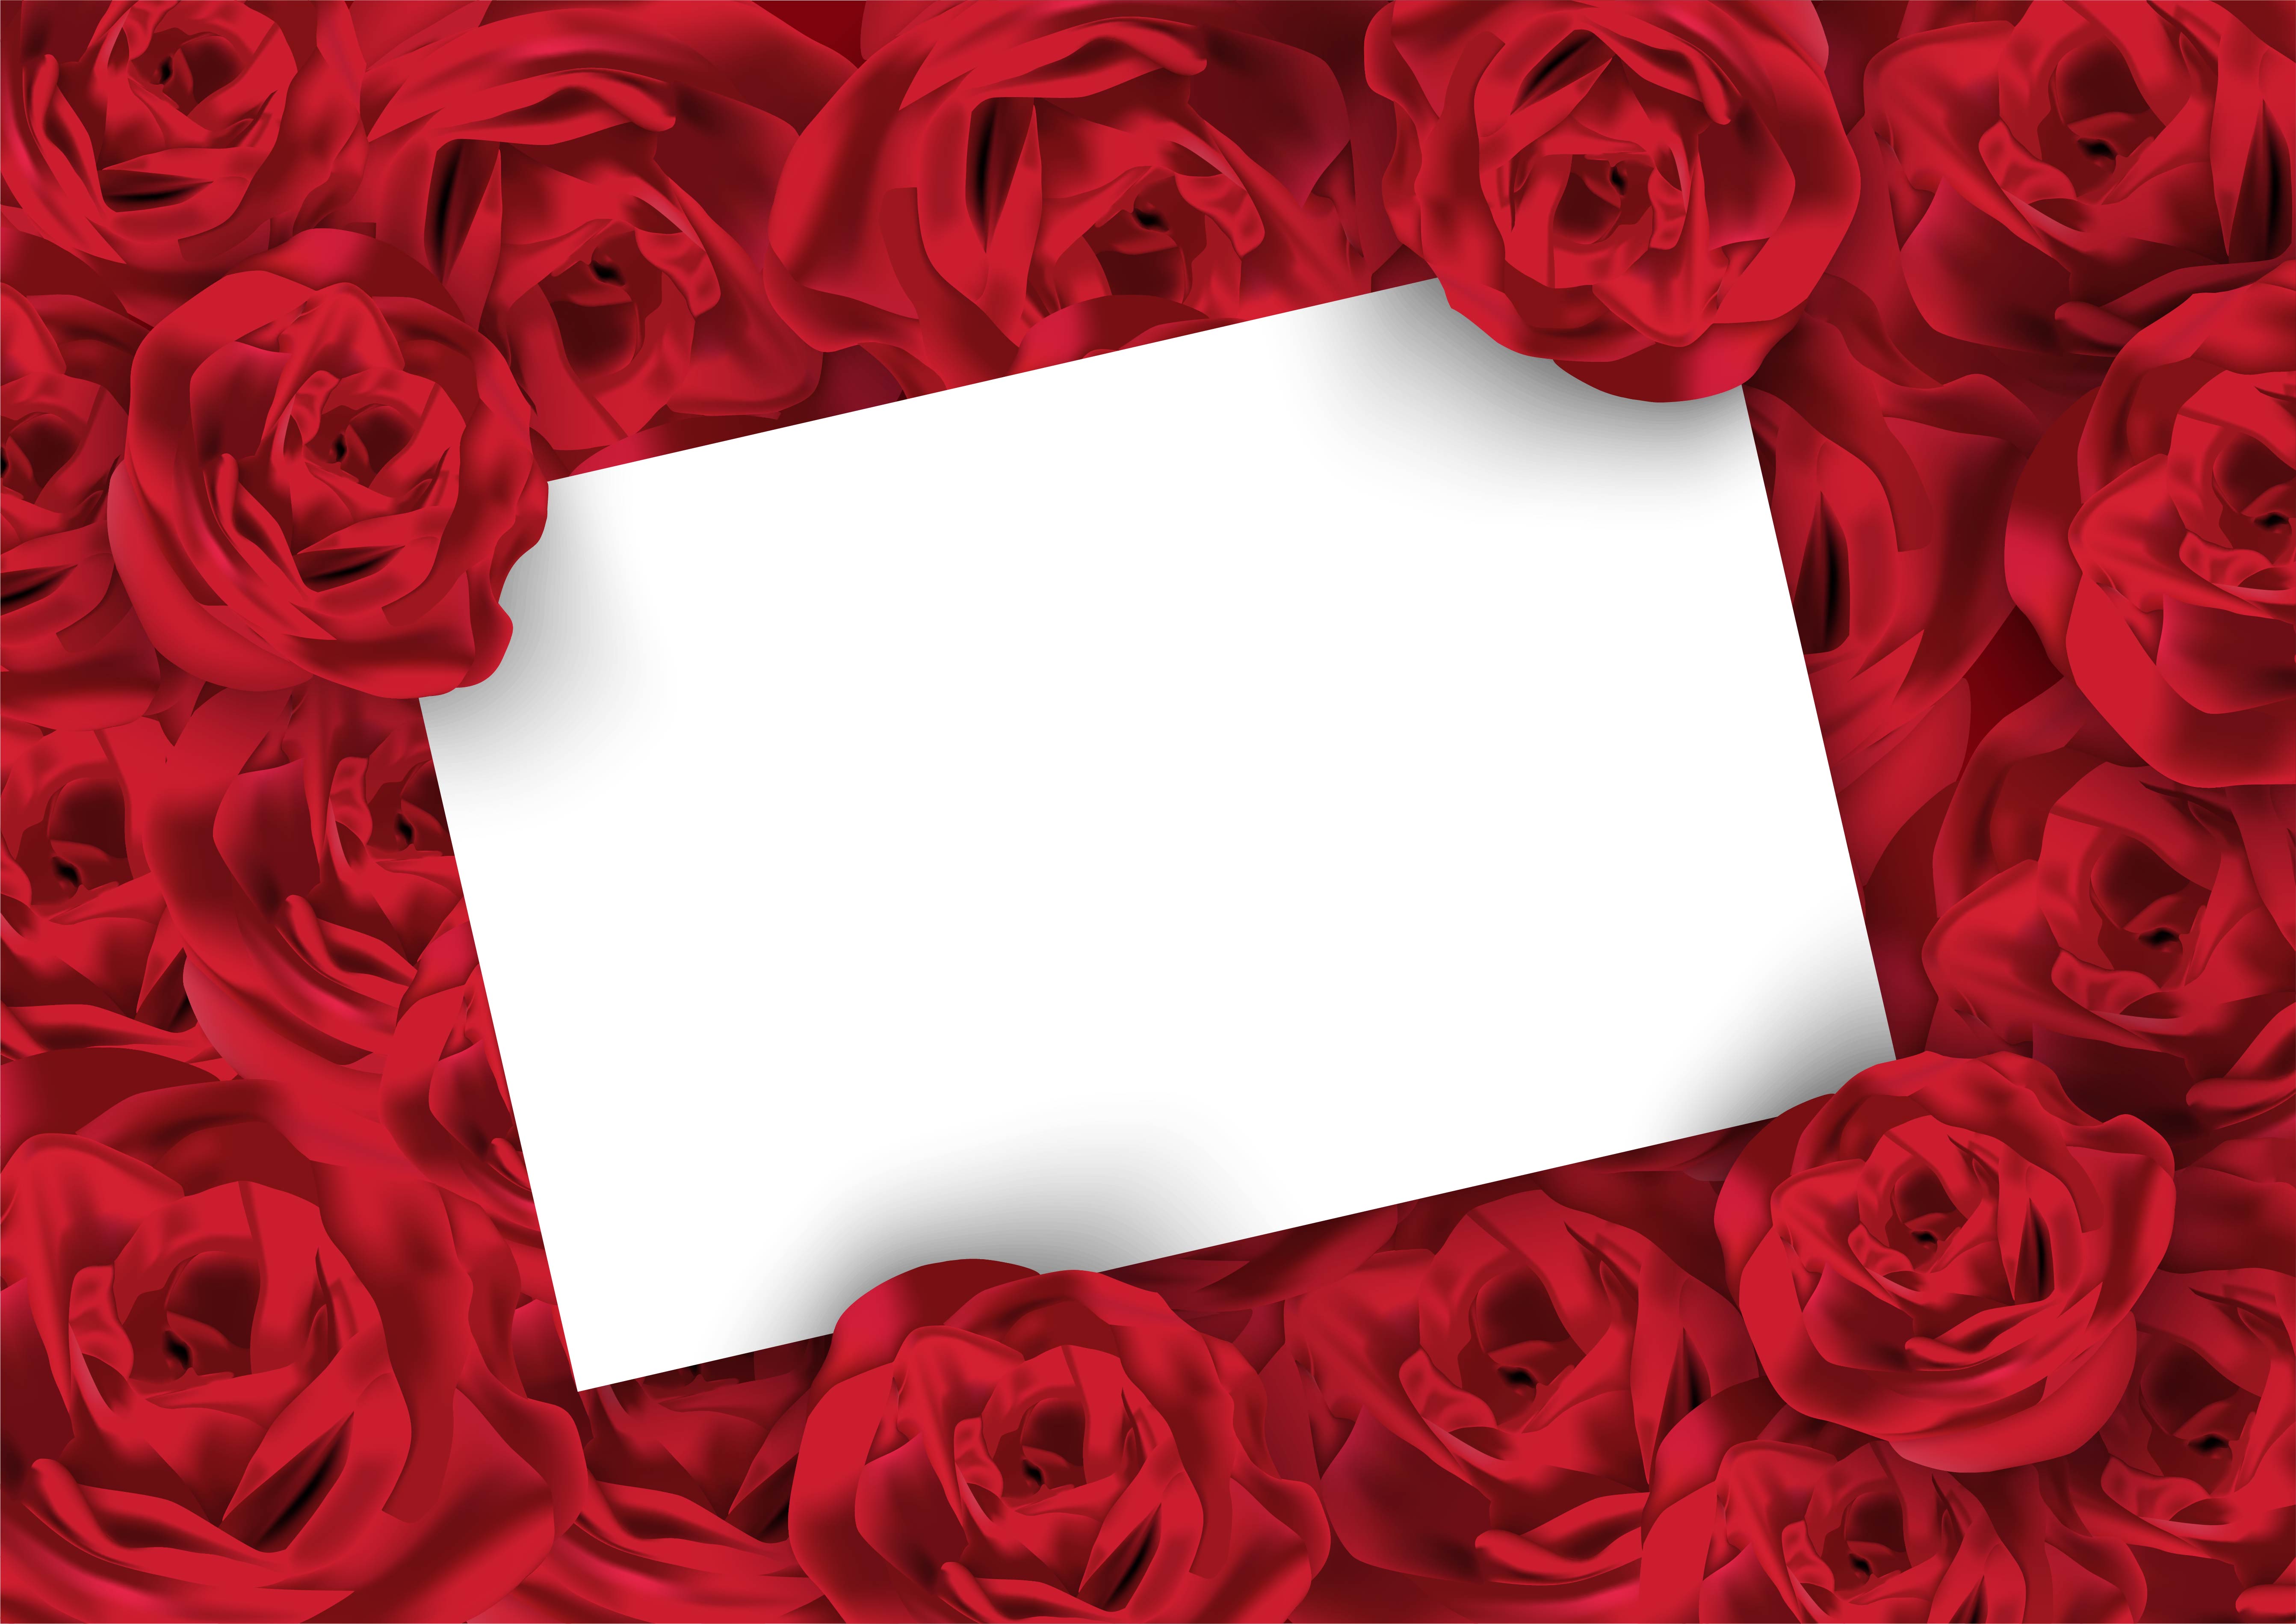 valentines-day-rose-background-with-white-blank-card-692571-vector-art